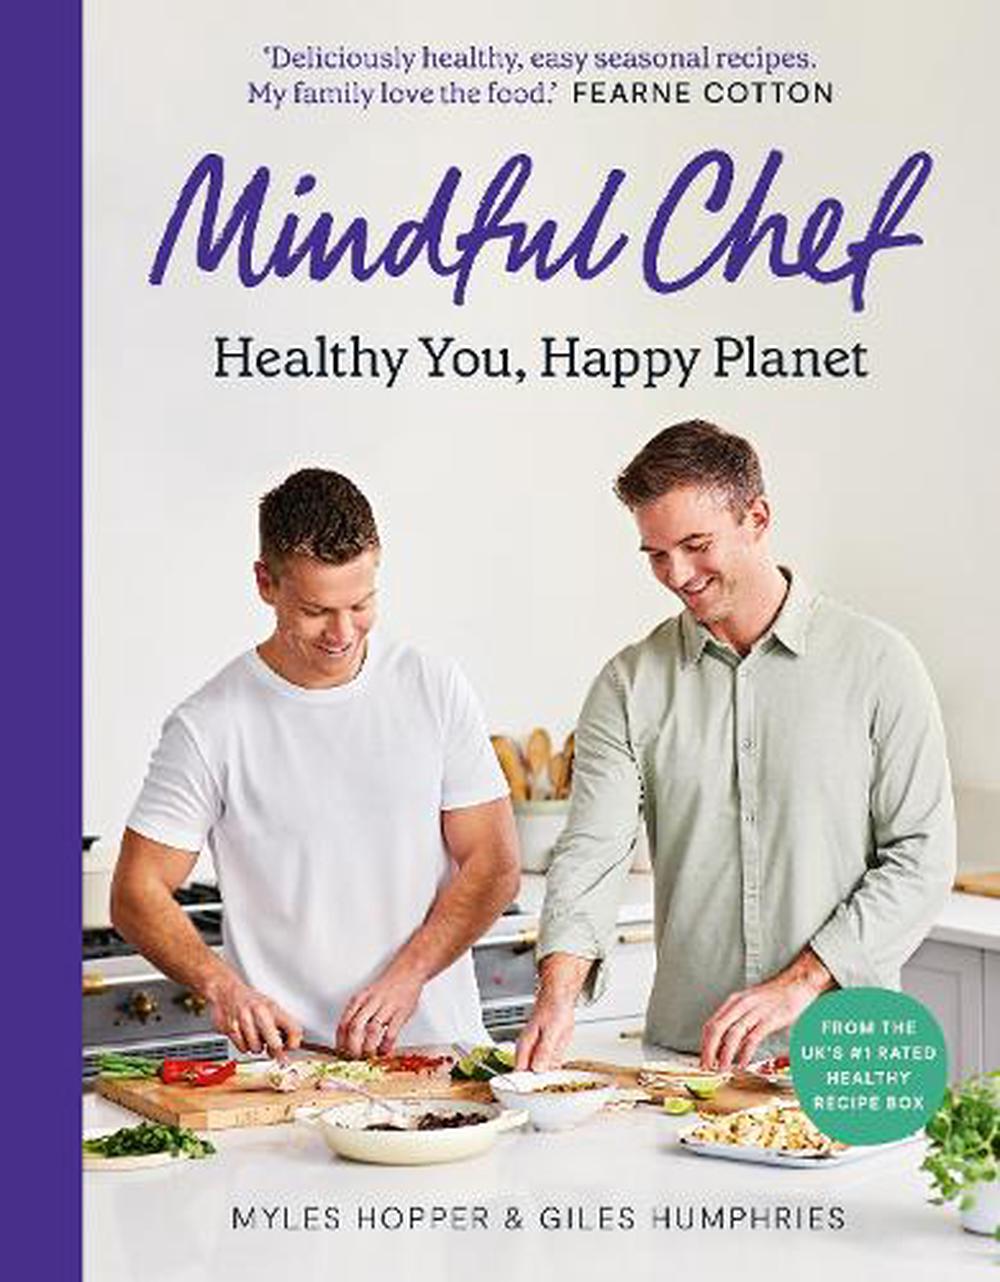 Mindful Chef by Myles Hopper, Hardcover, 9781780896700 | Buy online at ...